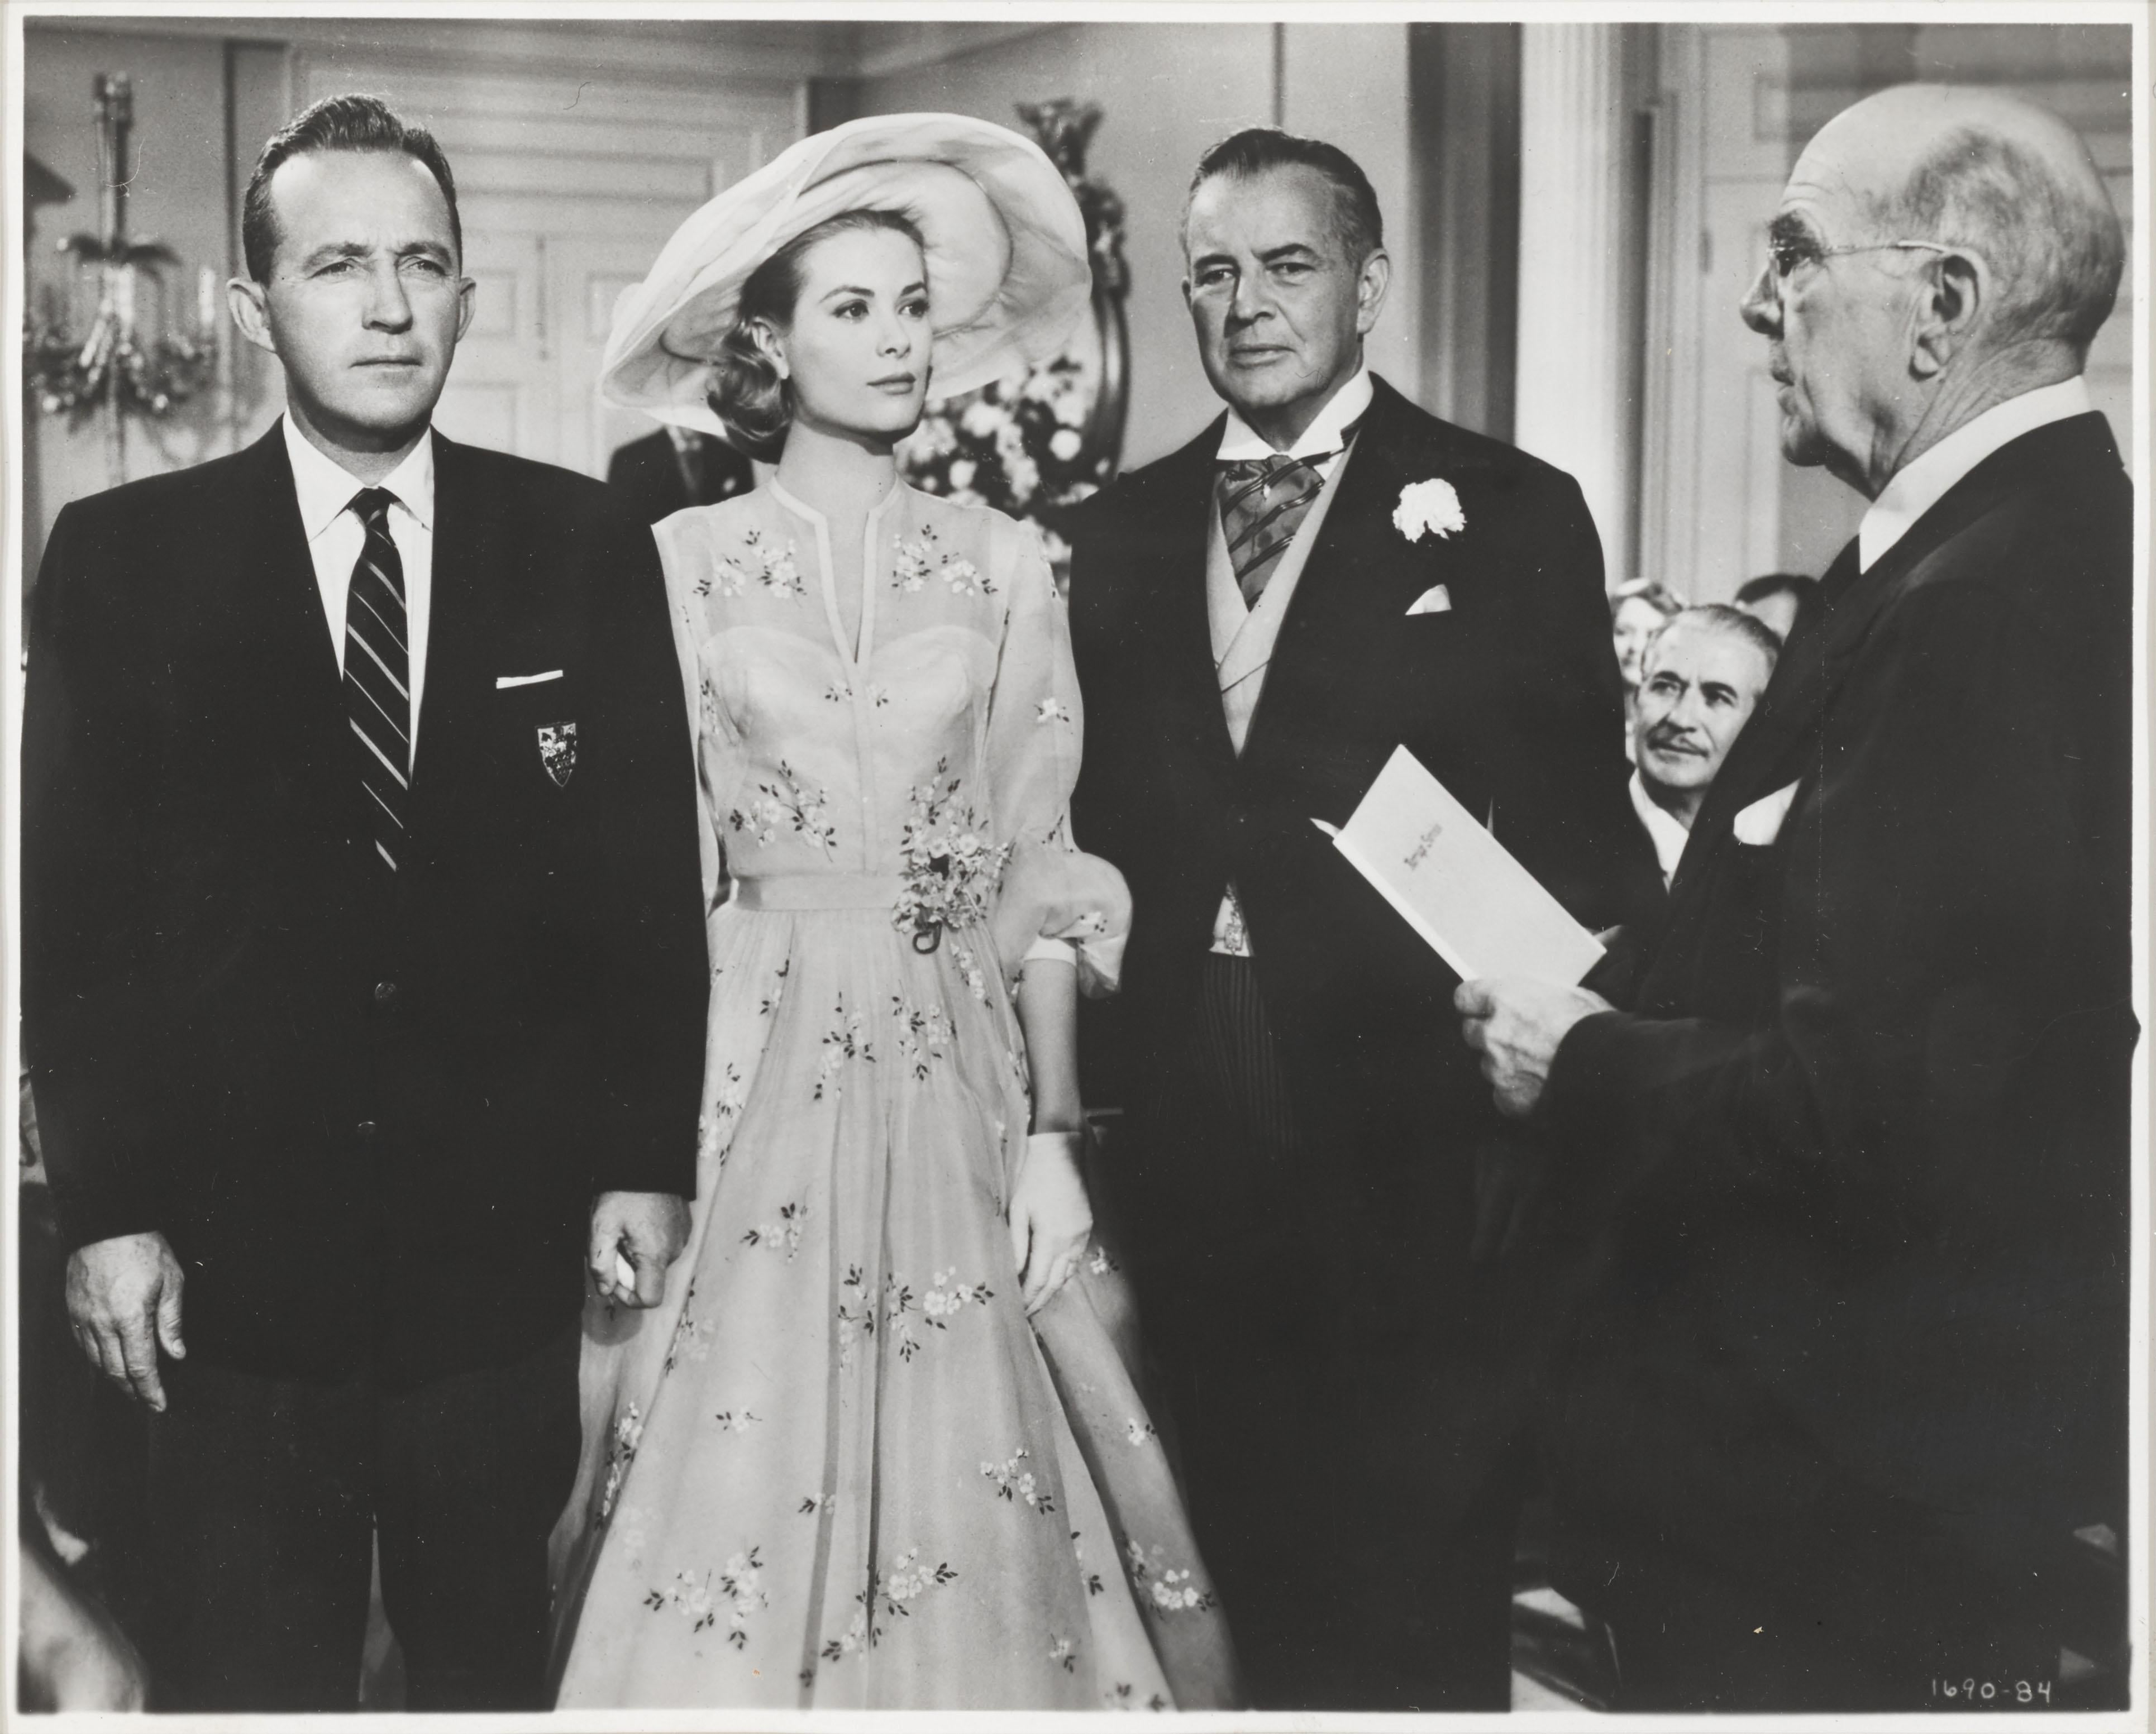 Original US studio production photo for the 1956 Classic comedy, musical starring Bing Crosby, Grace Kelly, Frank Sinatra, Louis Armstrong The film was remake of the 1940 The Philadelphia Story.
There is a perspex window on the back of the frame